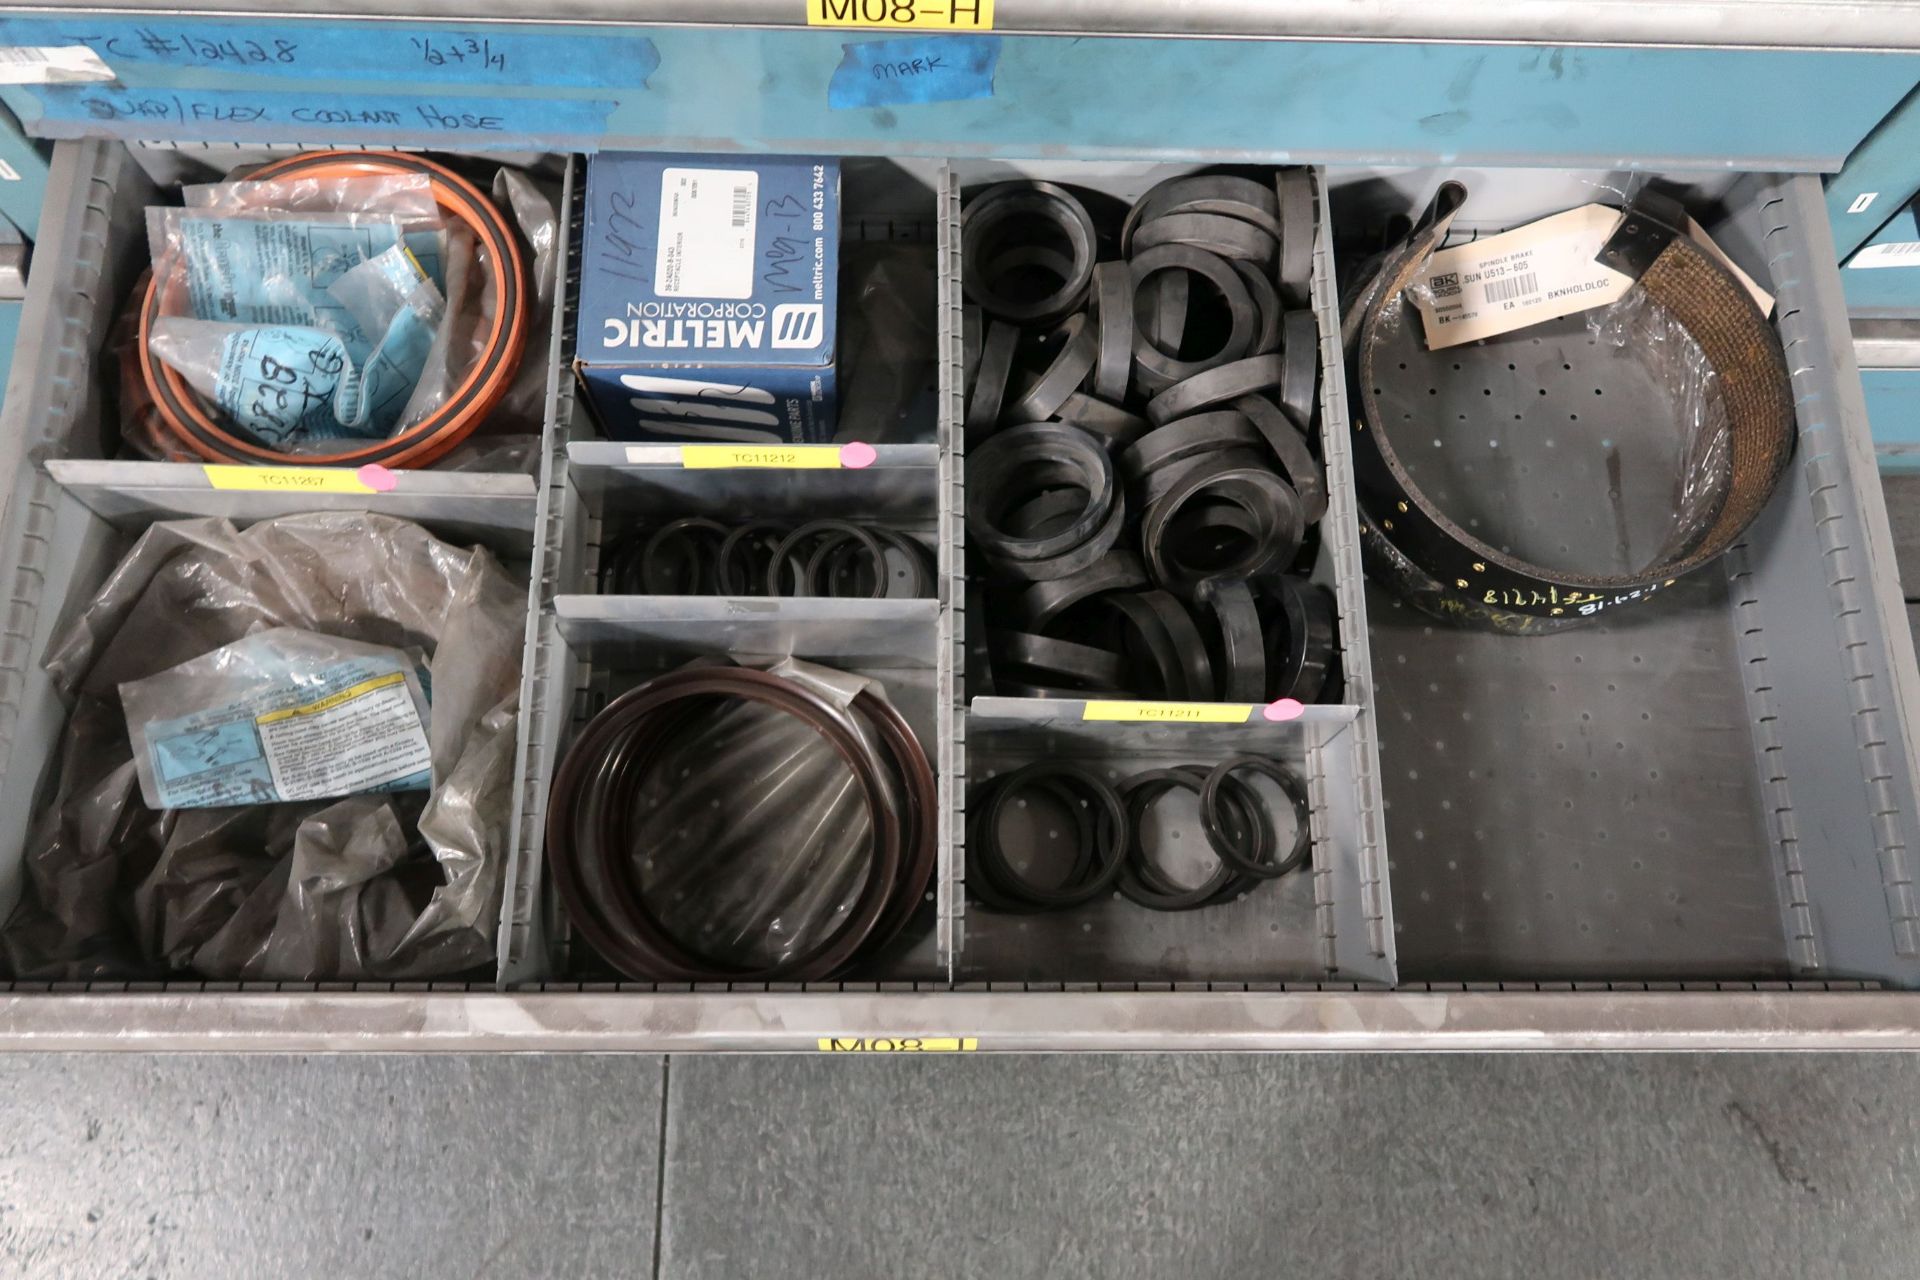 TOOLING CABINETS WITH CONTENTS - MOSTLY MACHINE PARTS **LOADING PRICE DUE TO ERRA - $2,000.00** - Image 50 of 59